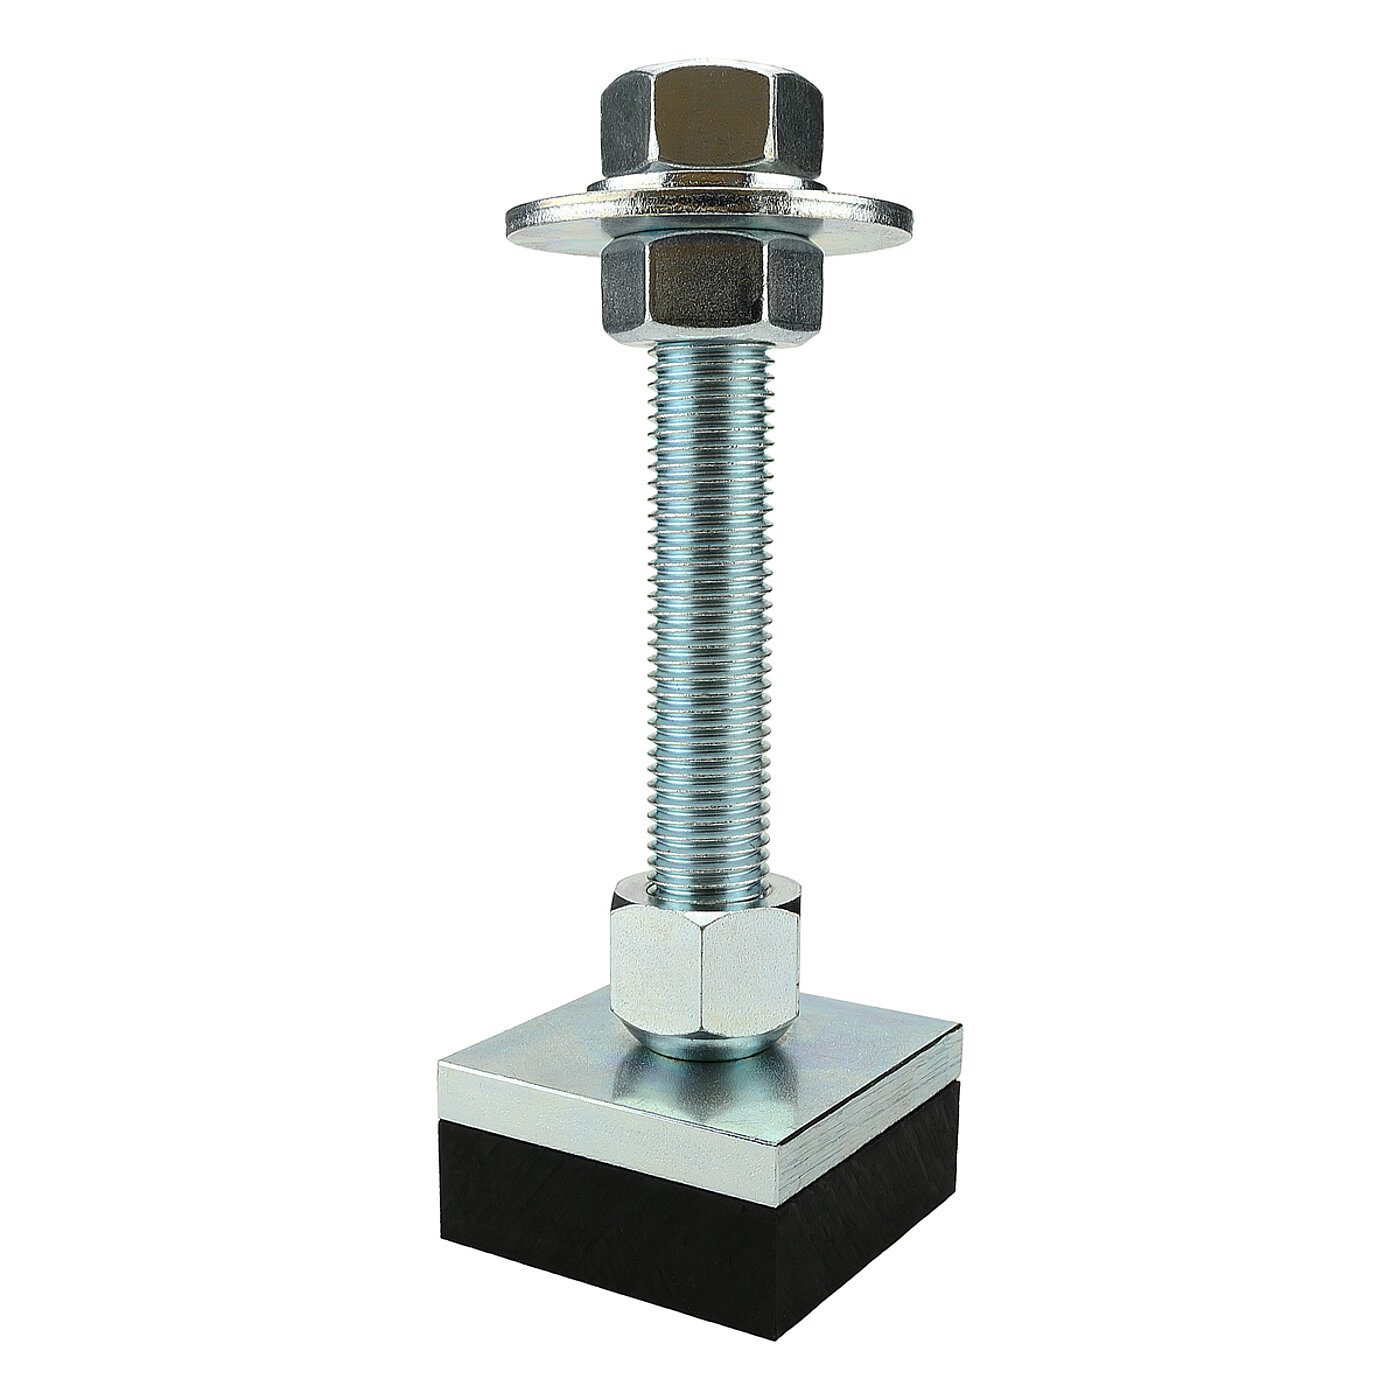 a square machine foot made of zinc-galvanized steel plate with black elastomer NBR at the bottom for vibration dampening and thread in a pendulum-action hexagonal cap nut on top, isolated on white background